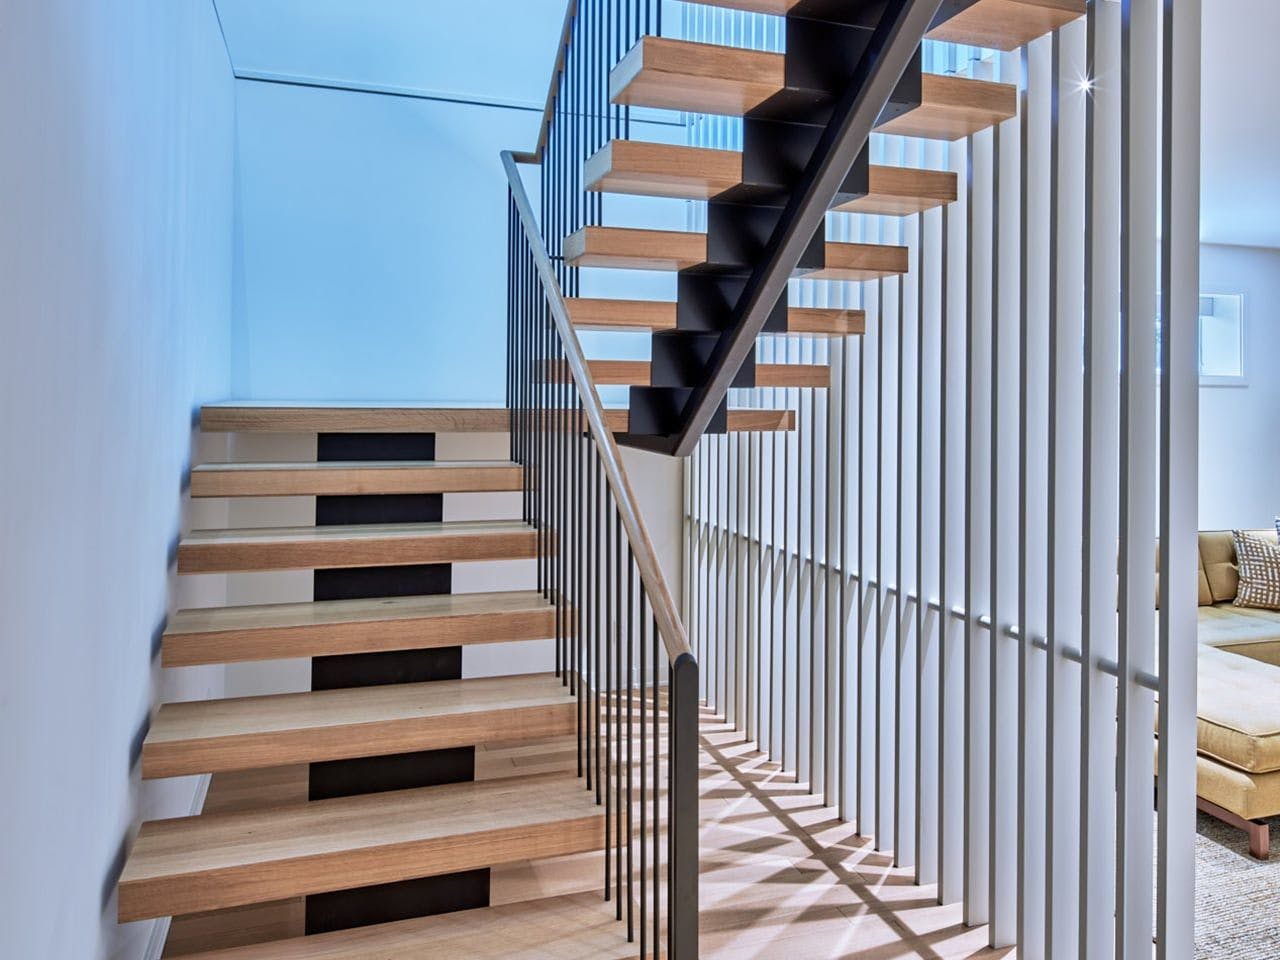 Watermark open staircase and slat wall